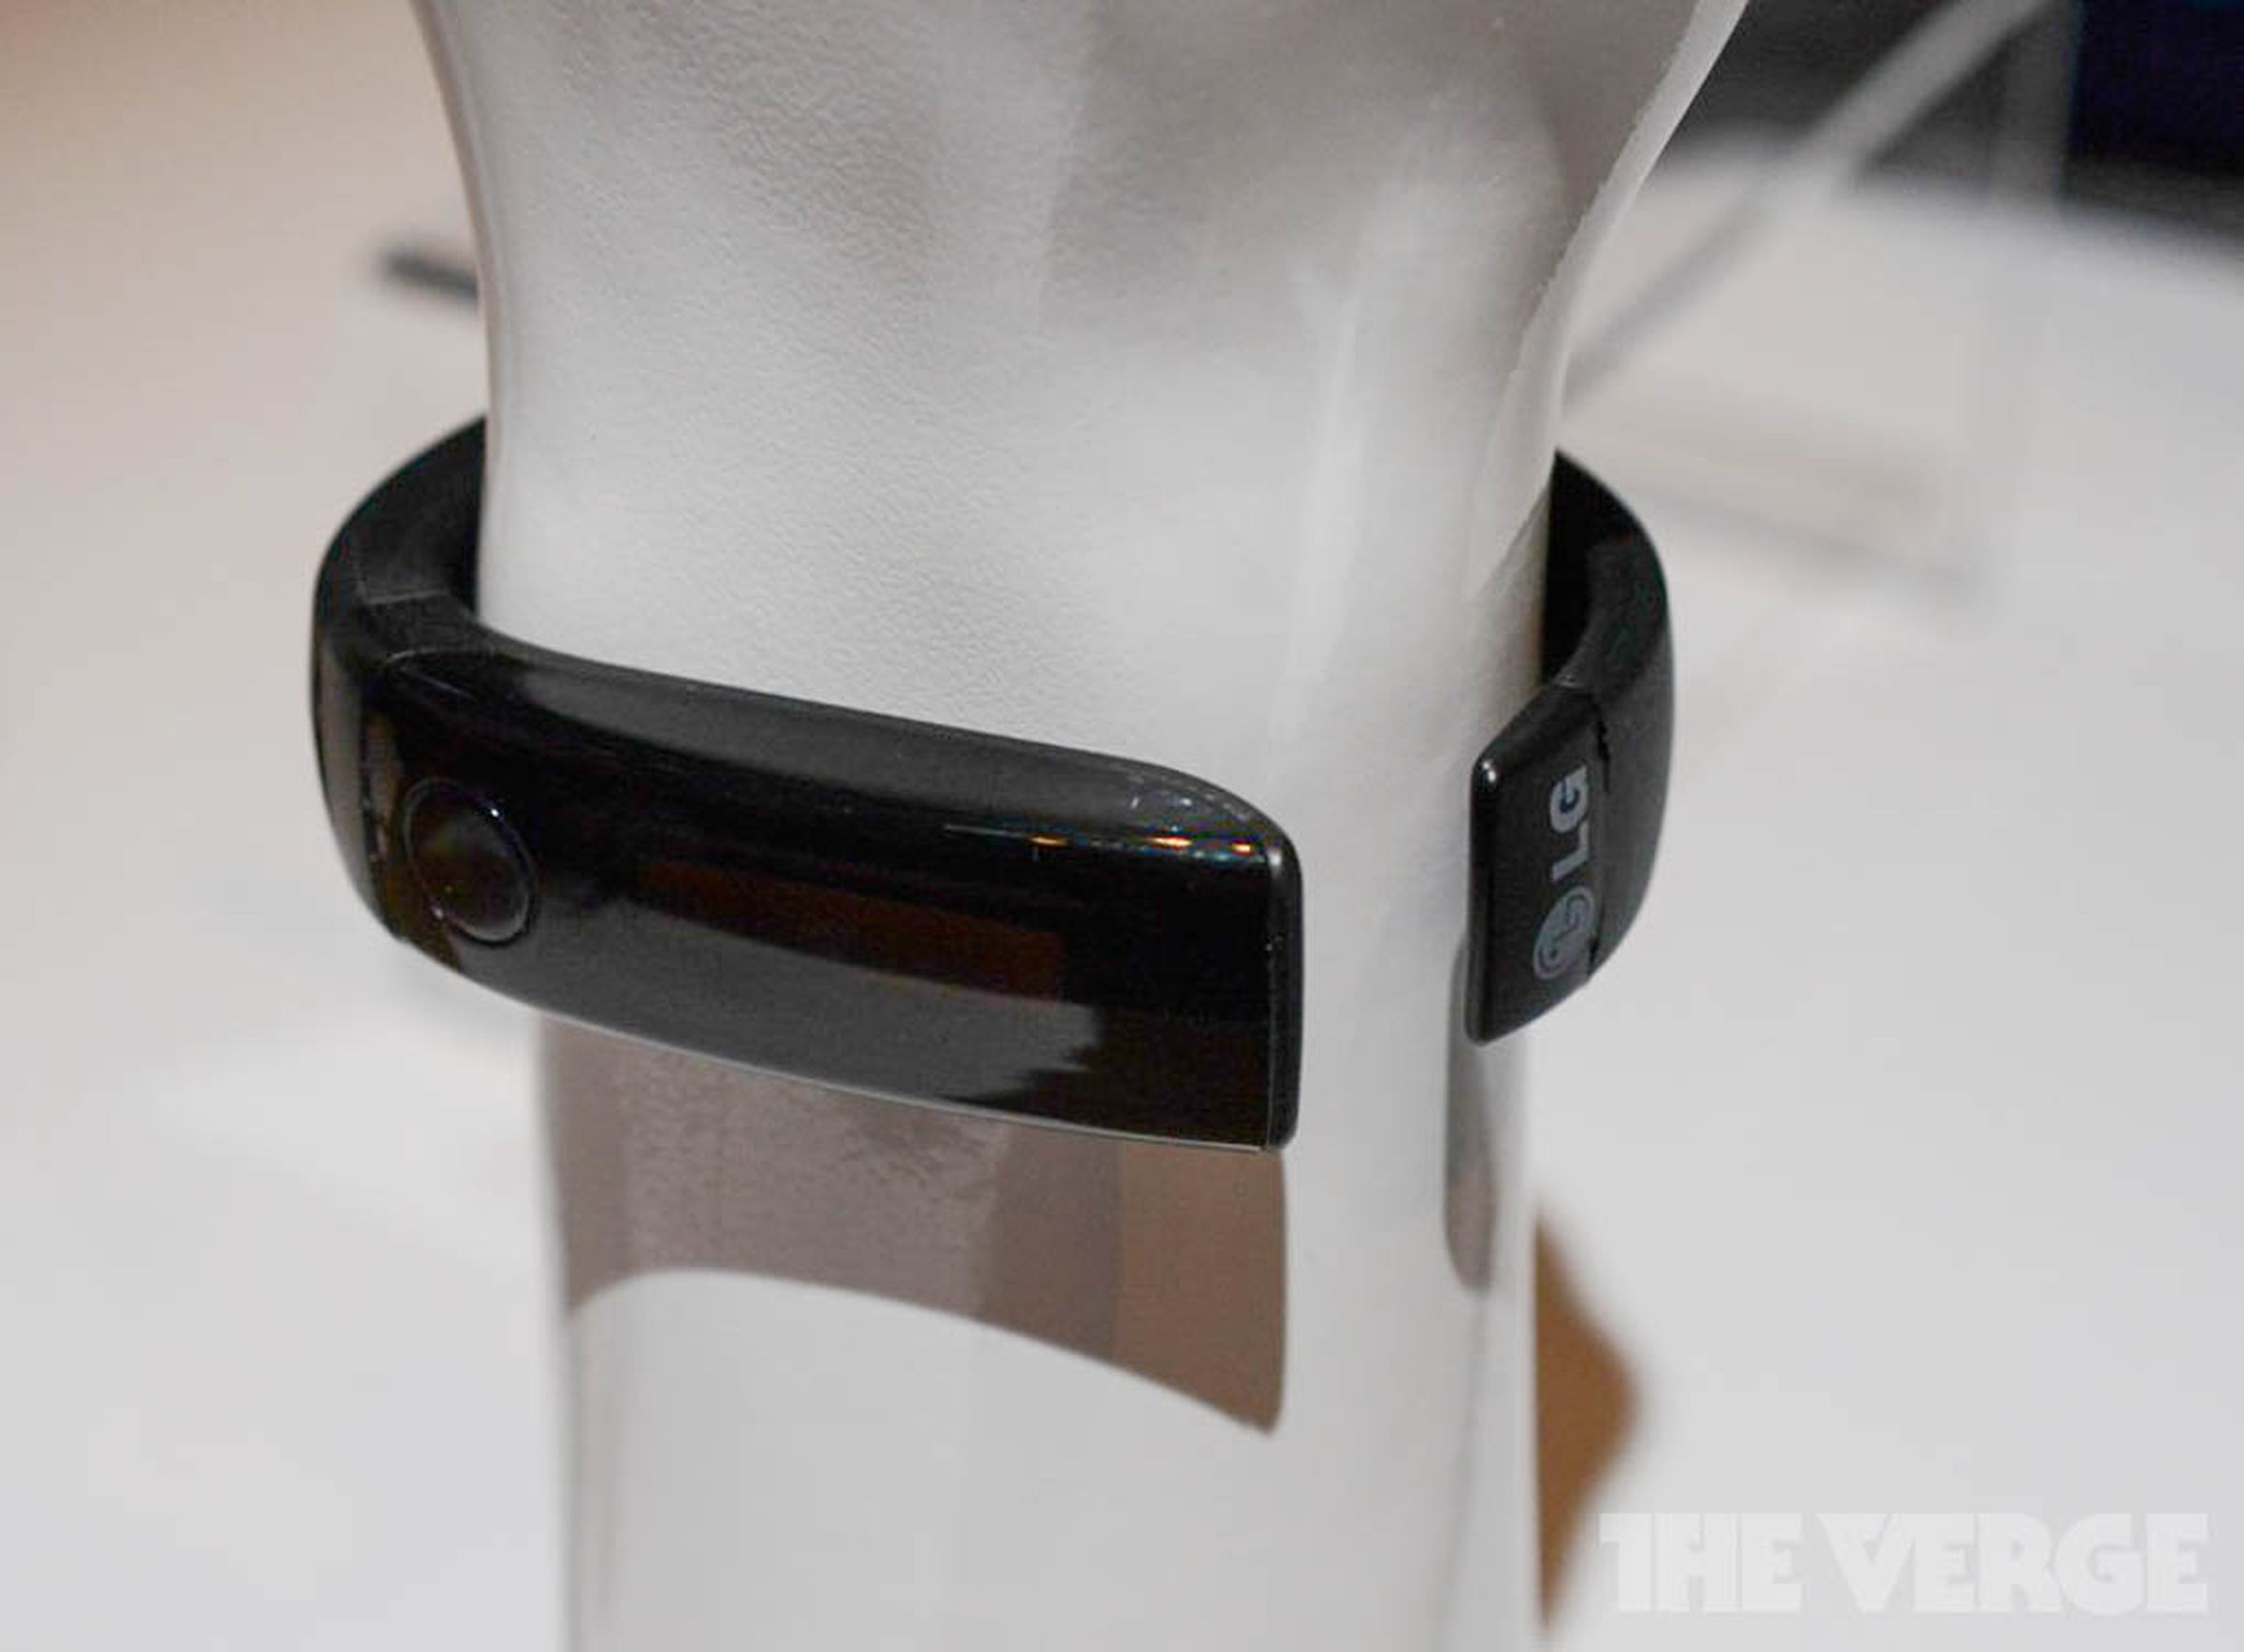 LG's Lifeband Touch